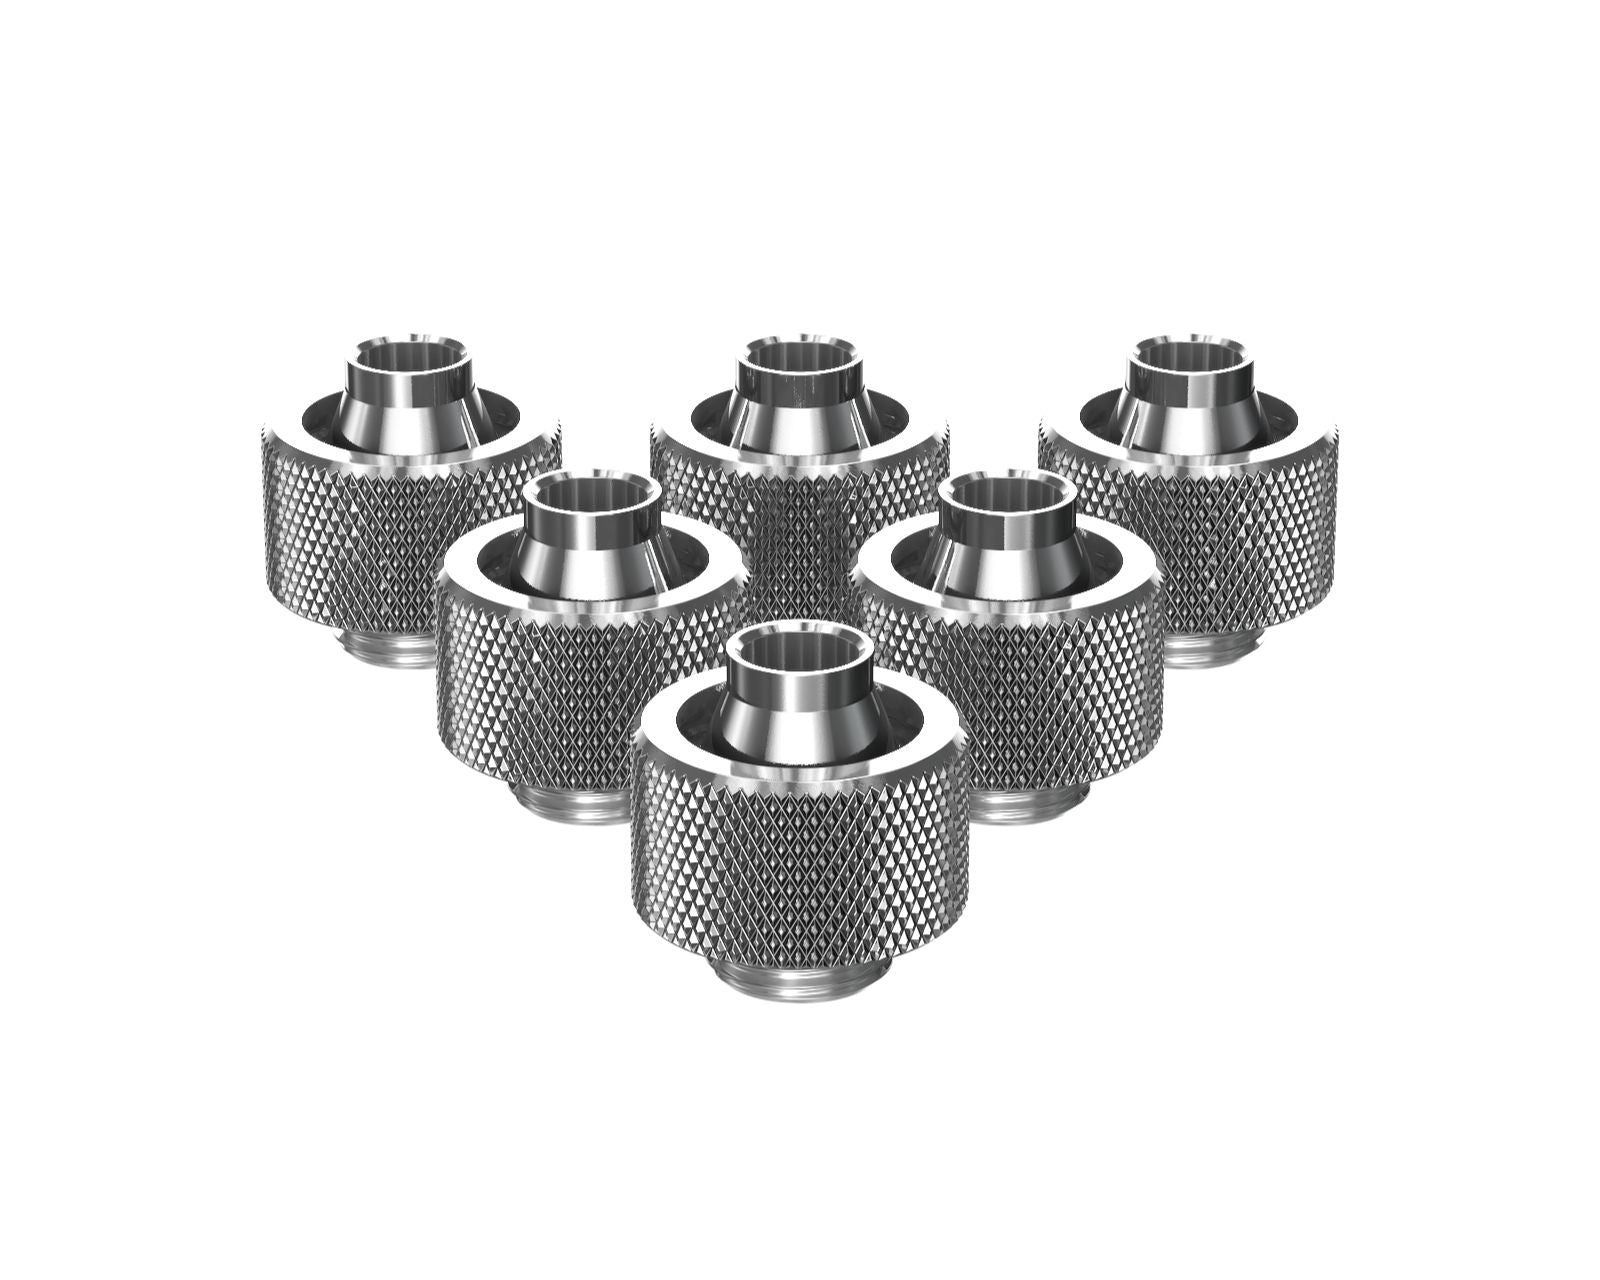 PrimoChill SecureFit SX - Premium Compression Fitting For 3/8in ID x 5/8in OD Flexible Tubing 6 Pack (F-SFSX58-6) - Available in 20+ Colors, Custom Watercooling Loop Ready - Silver Nickel